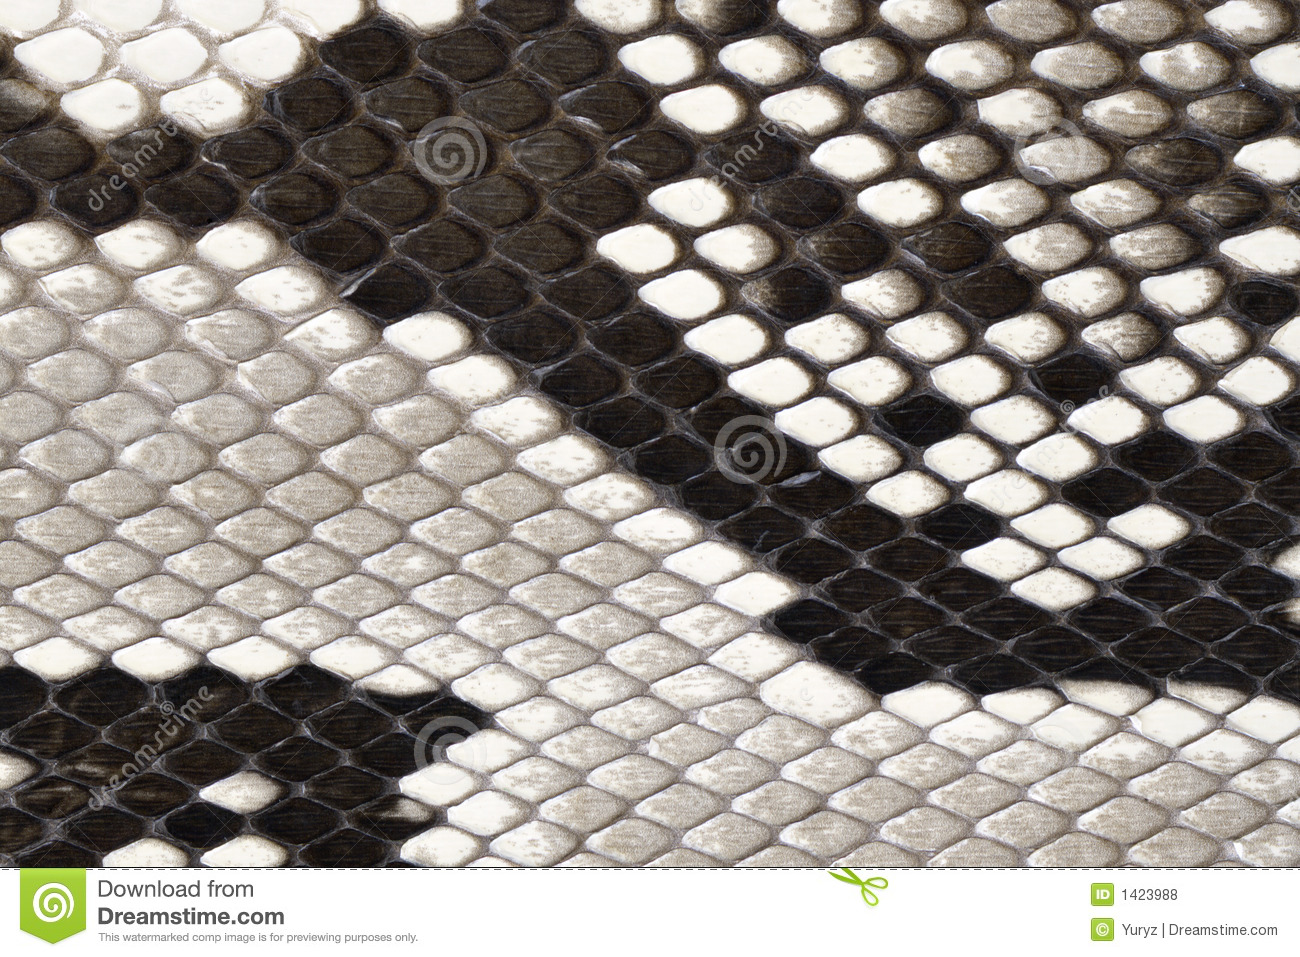 Snake Skin Leather Material Royalty Free Stock Photos   Image  1423988